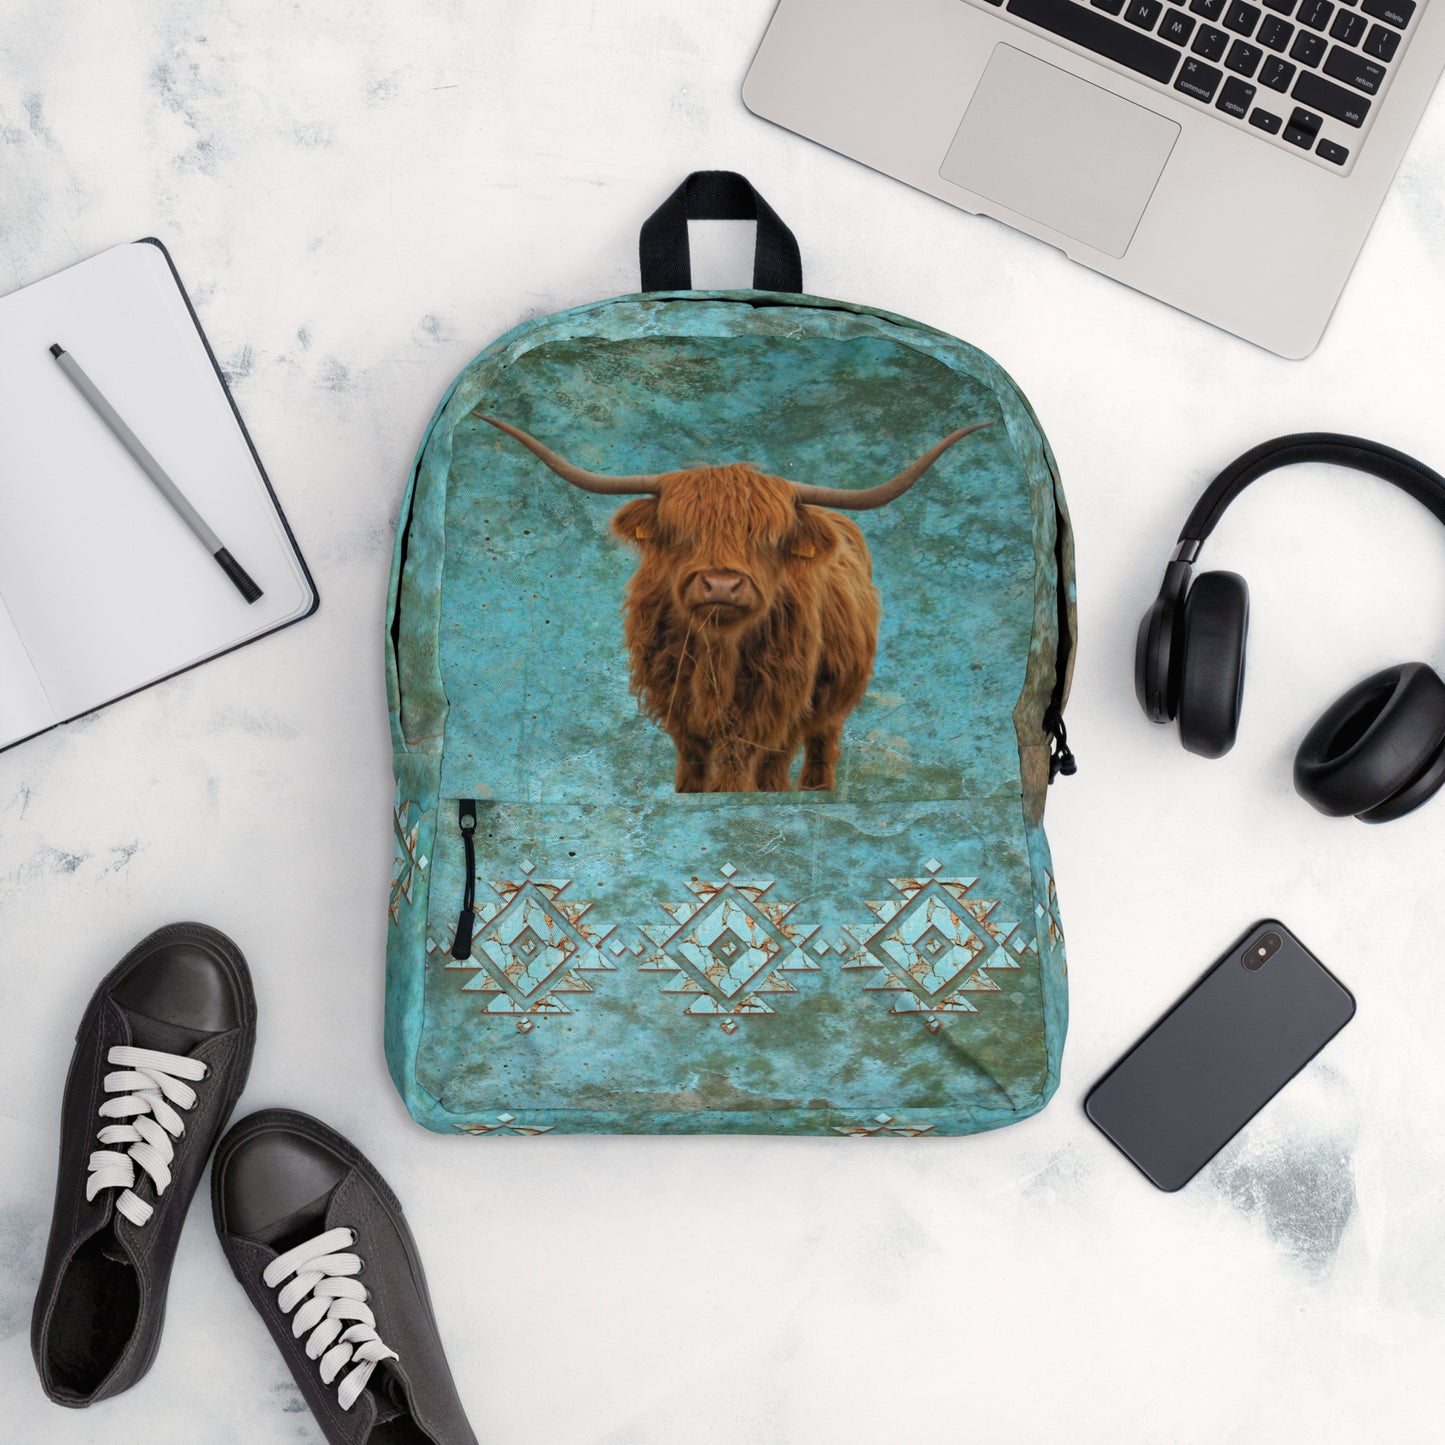 Turquoise Highland Cow Backpack - backpack, hairy cow, highland, highland cow, turquoise, turquoise print -  - Baha Ranch Western Wear